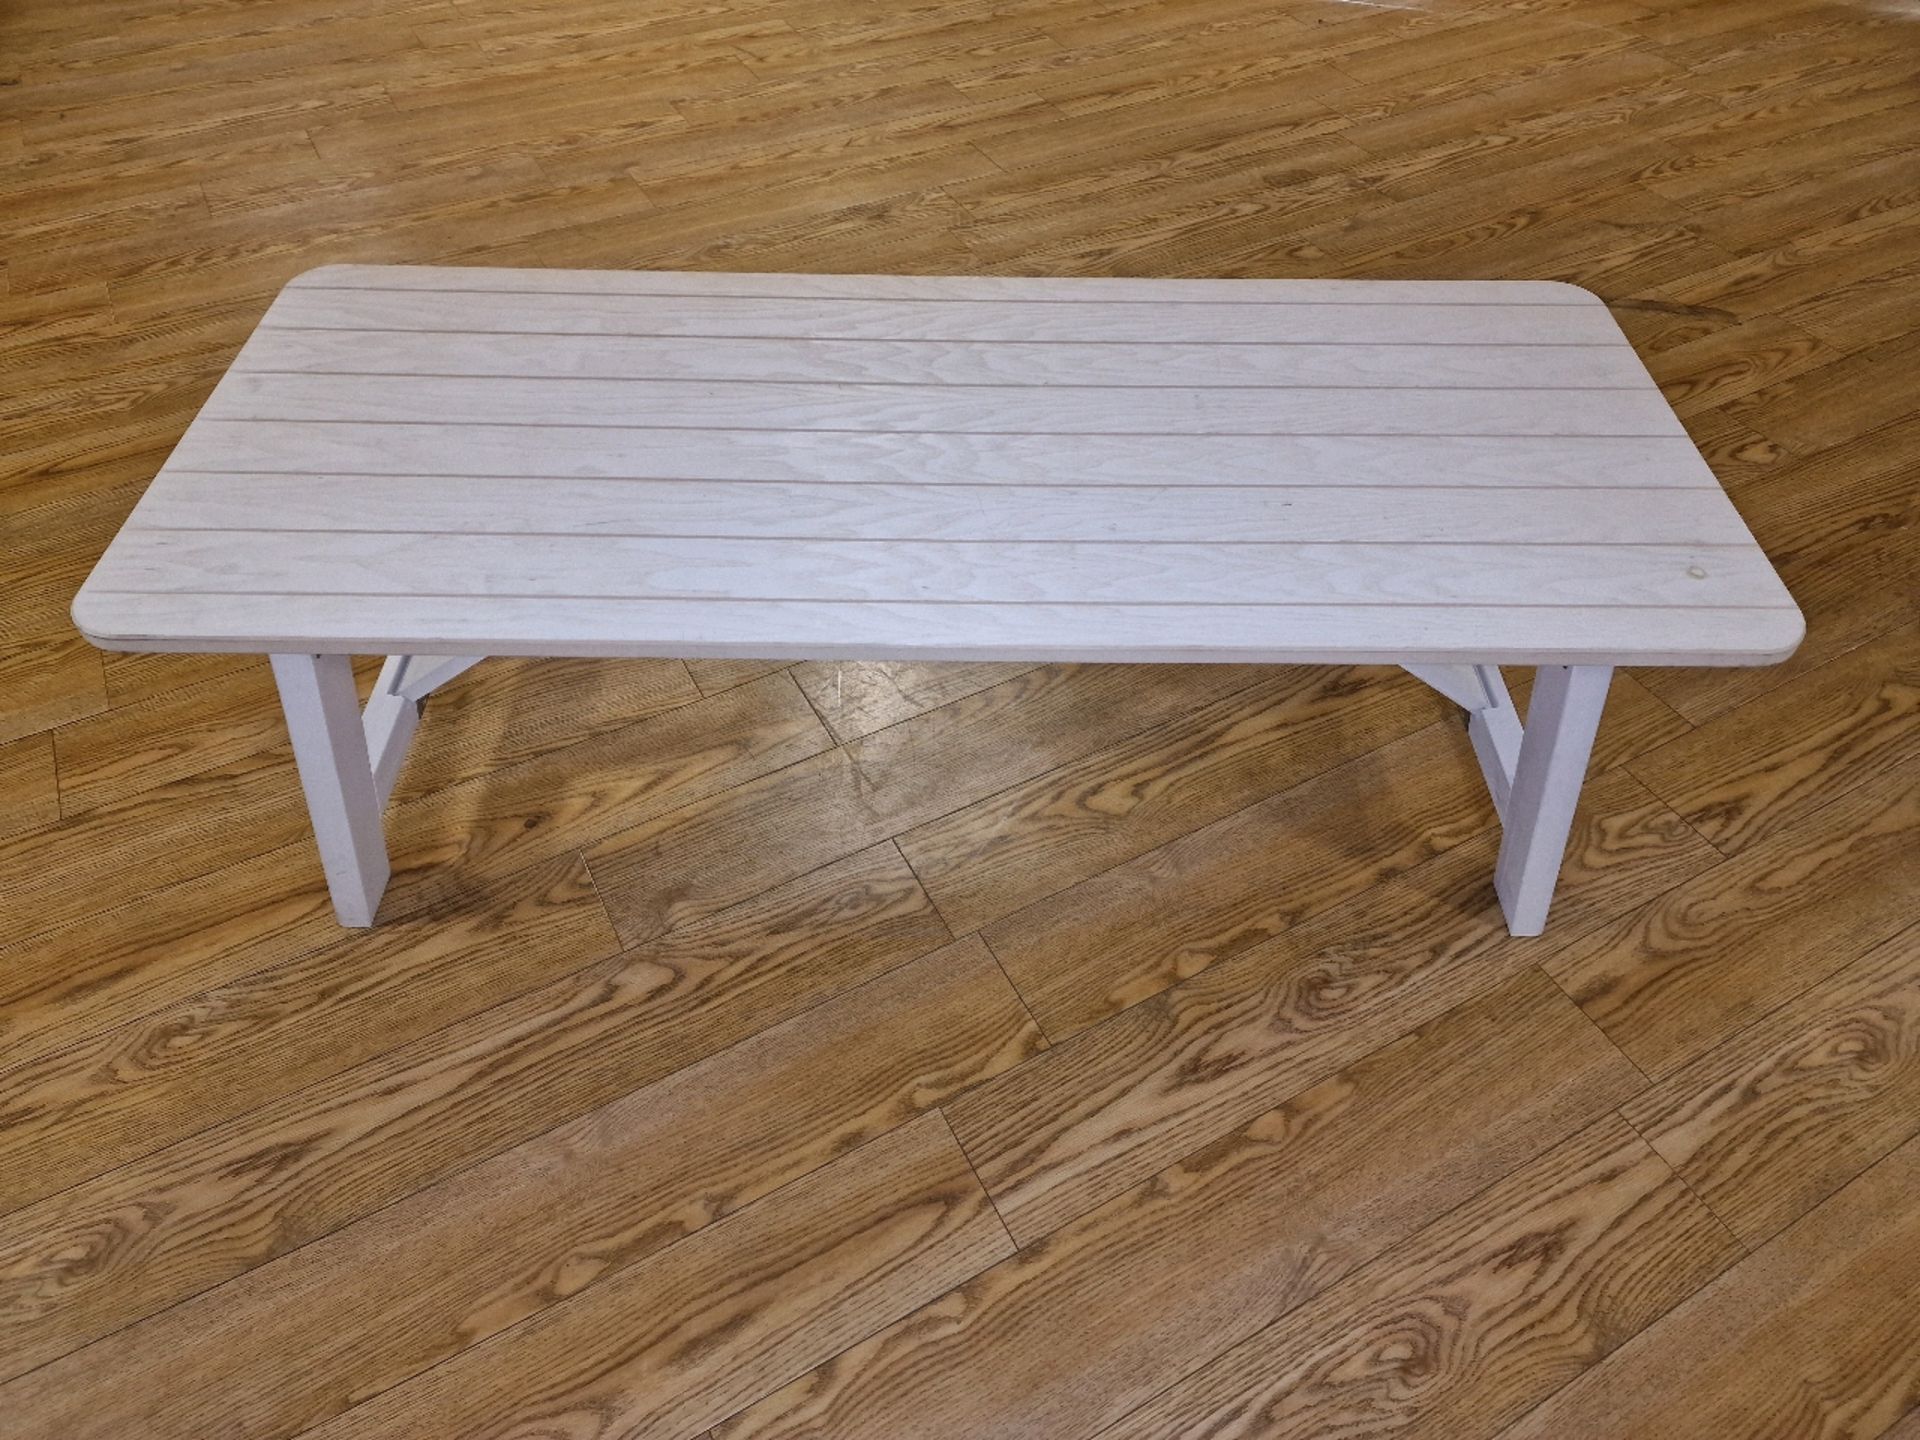 Wooden Slatted Table